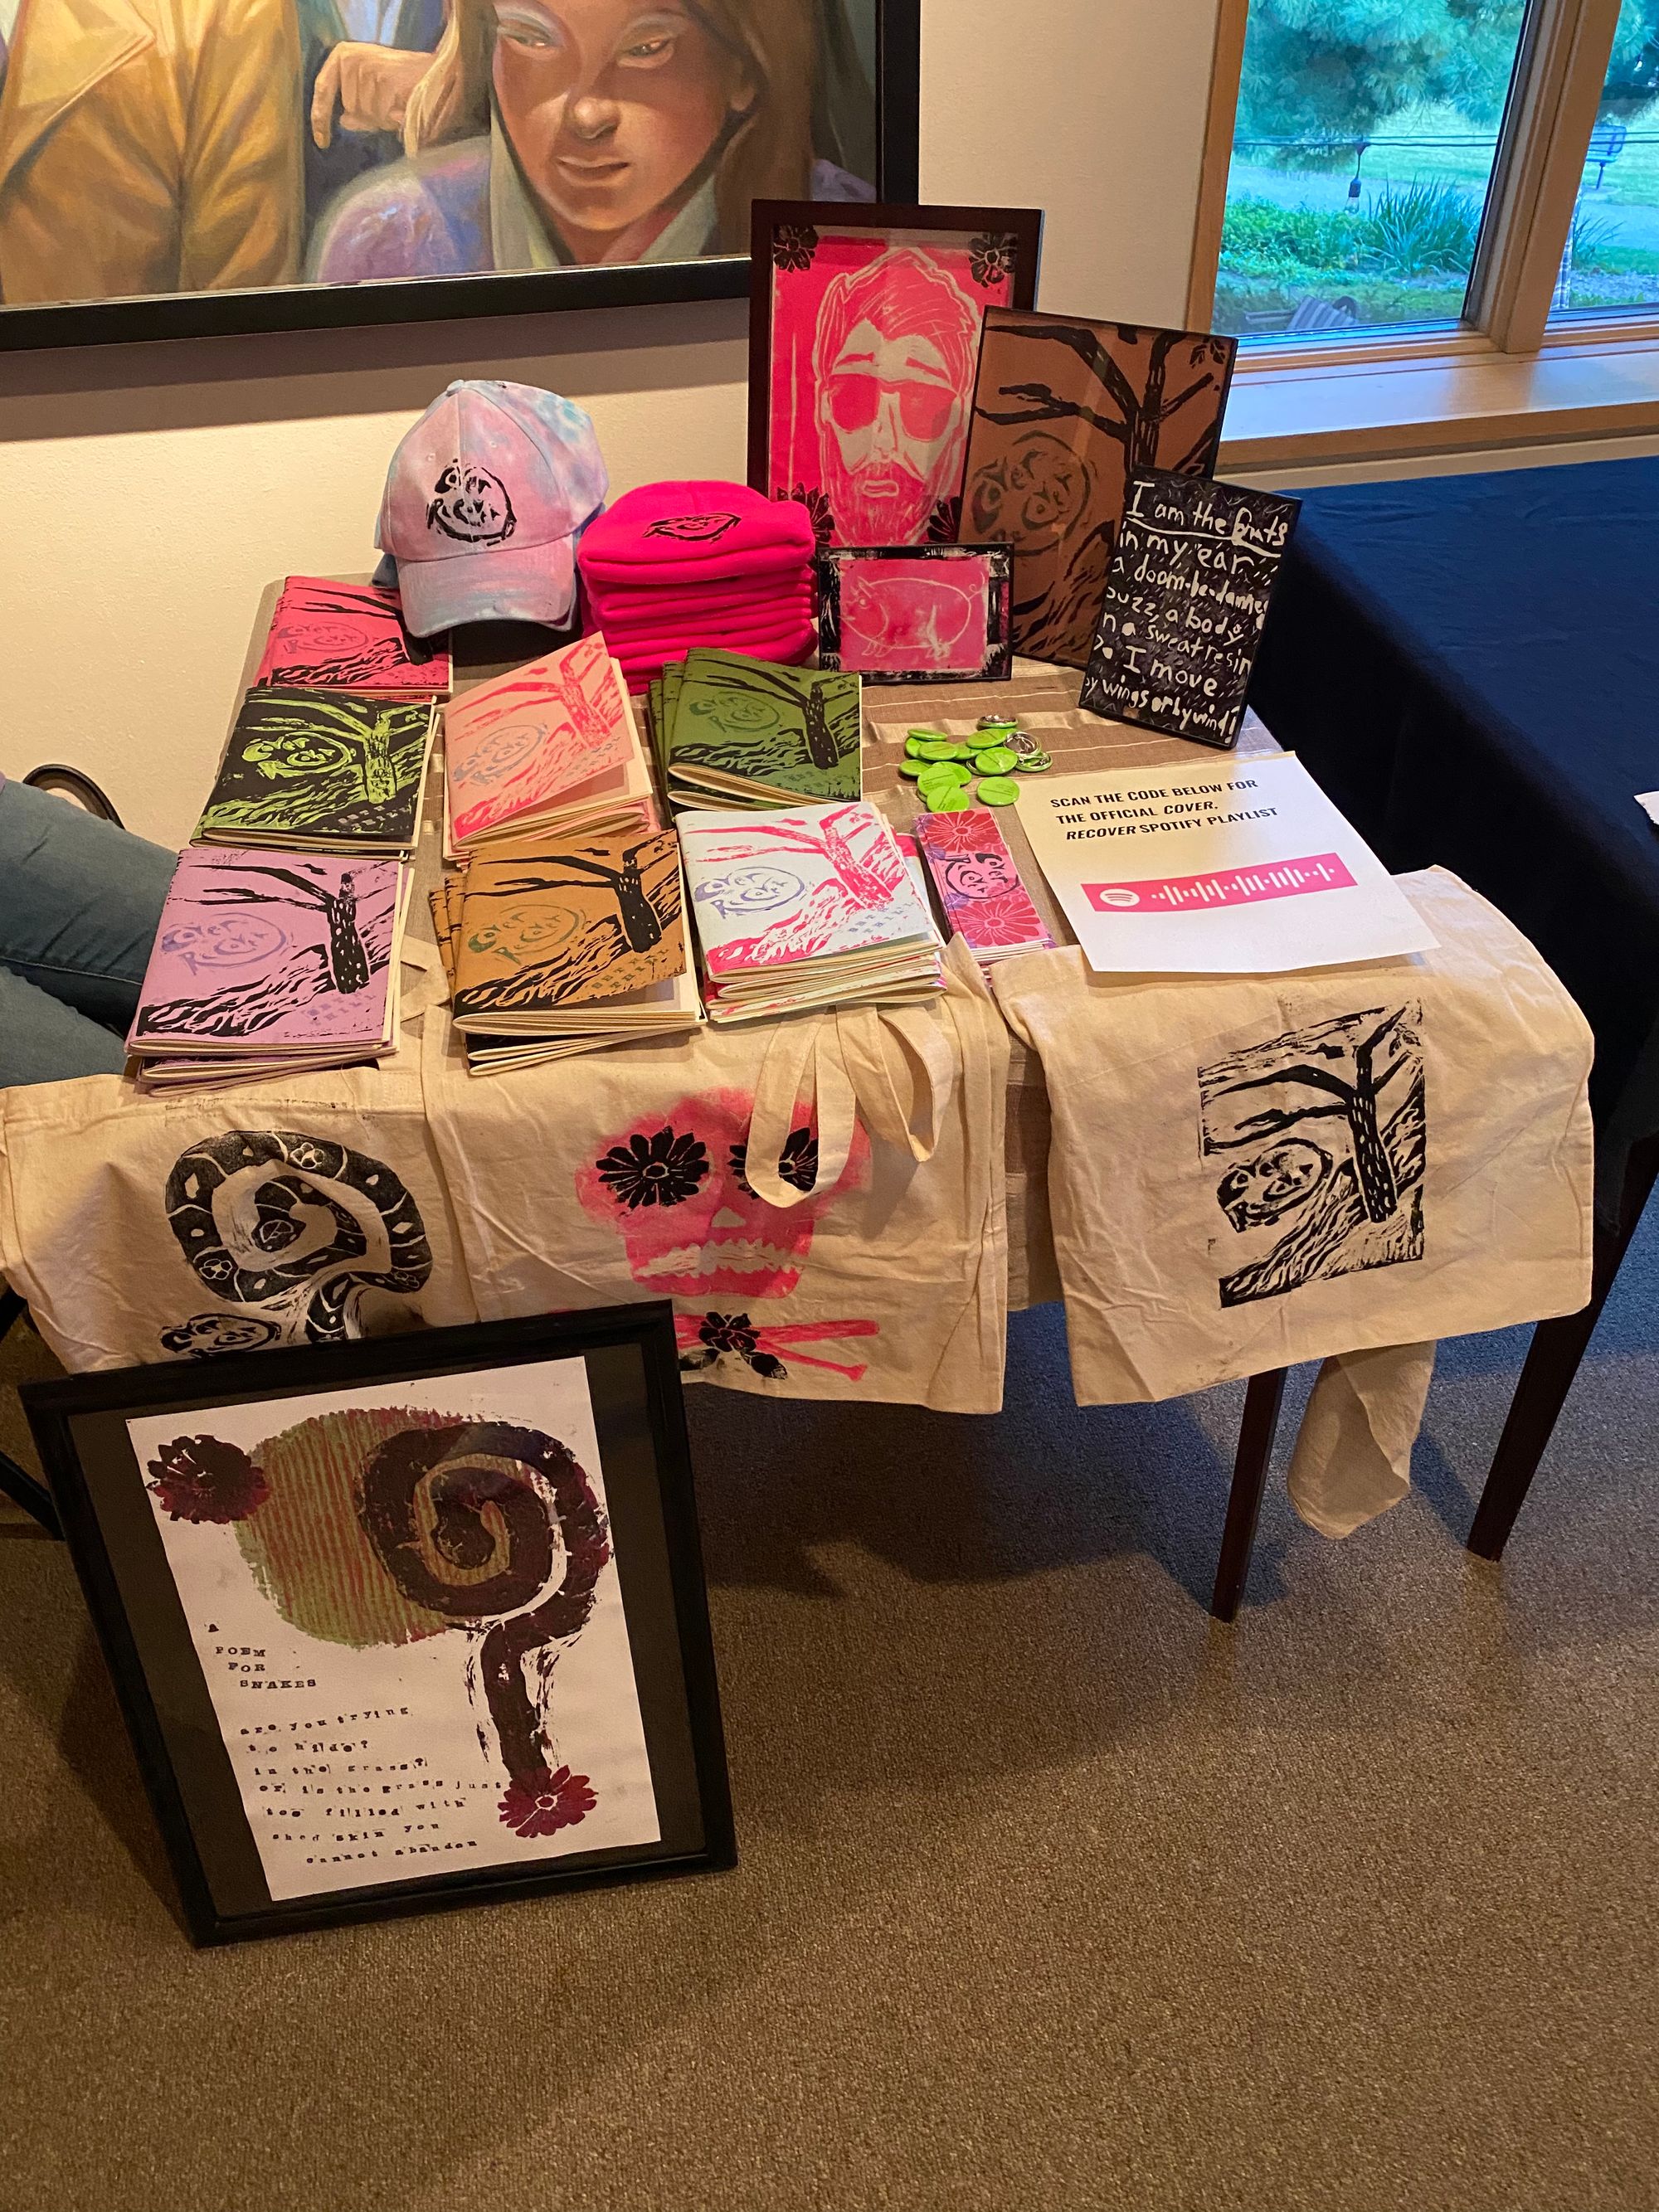 A table filled with copies of the chapbook, Cover, Recover, by Seth Thill, and merch with artwork related to the book.There are blue and pink tie-dyed ballcaps with the book titled printed on them, pink stocking caps with the title printed on the front, and five linocut carvings.